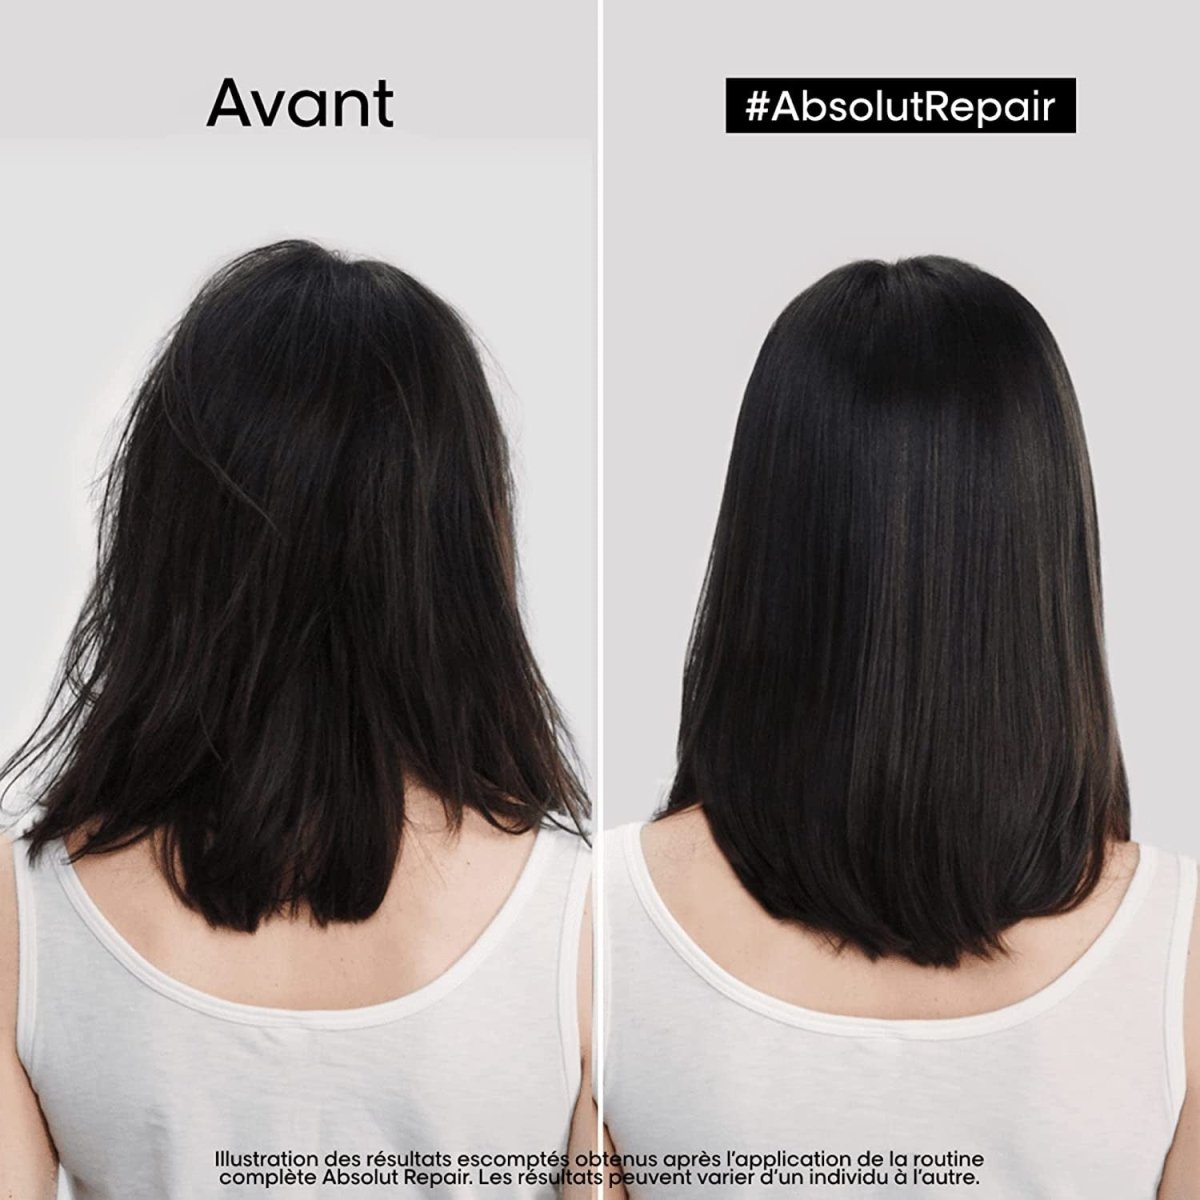 Coffret Absolut Repair - Shampoing. Masque. Huile 10-en-1 - BEAUTEPRICE Coffret Absolut Repair - Shampoing. Masque. Huile 10-en-1 L'Oréal Professionnel BEAUTEPRICE